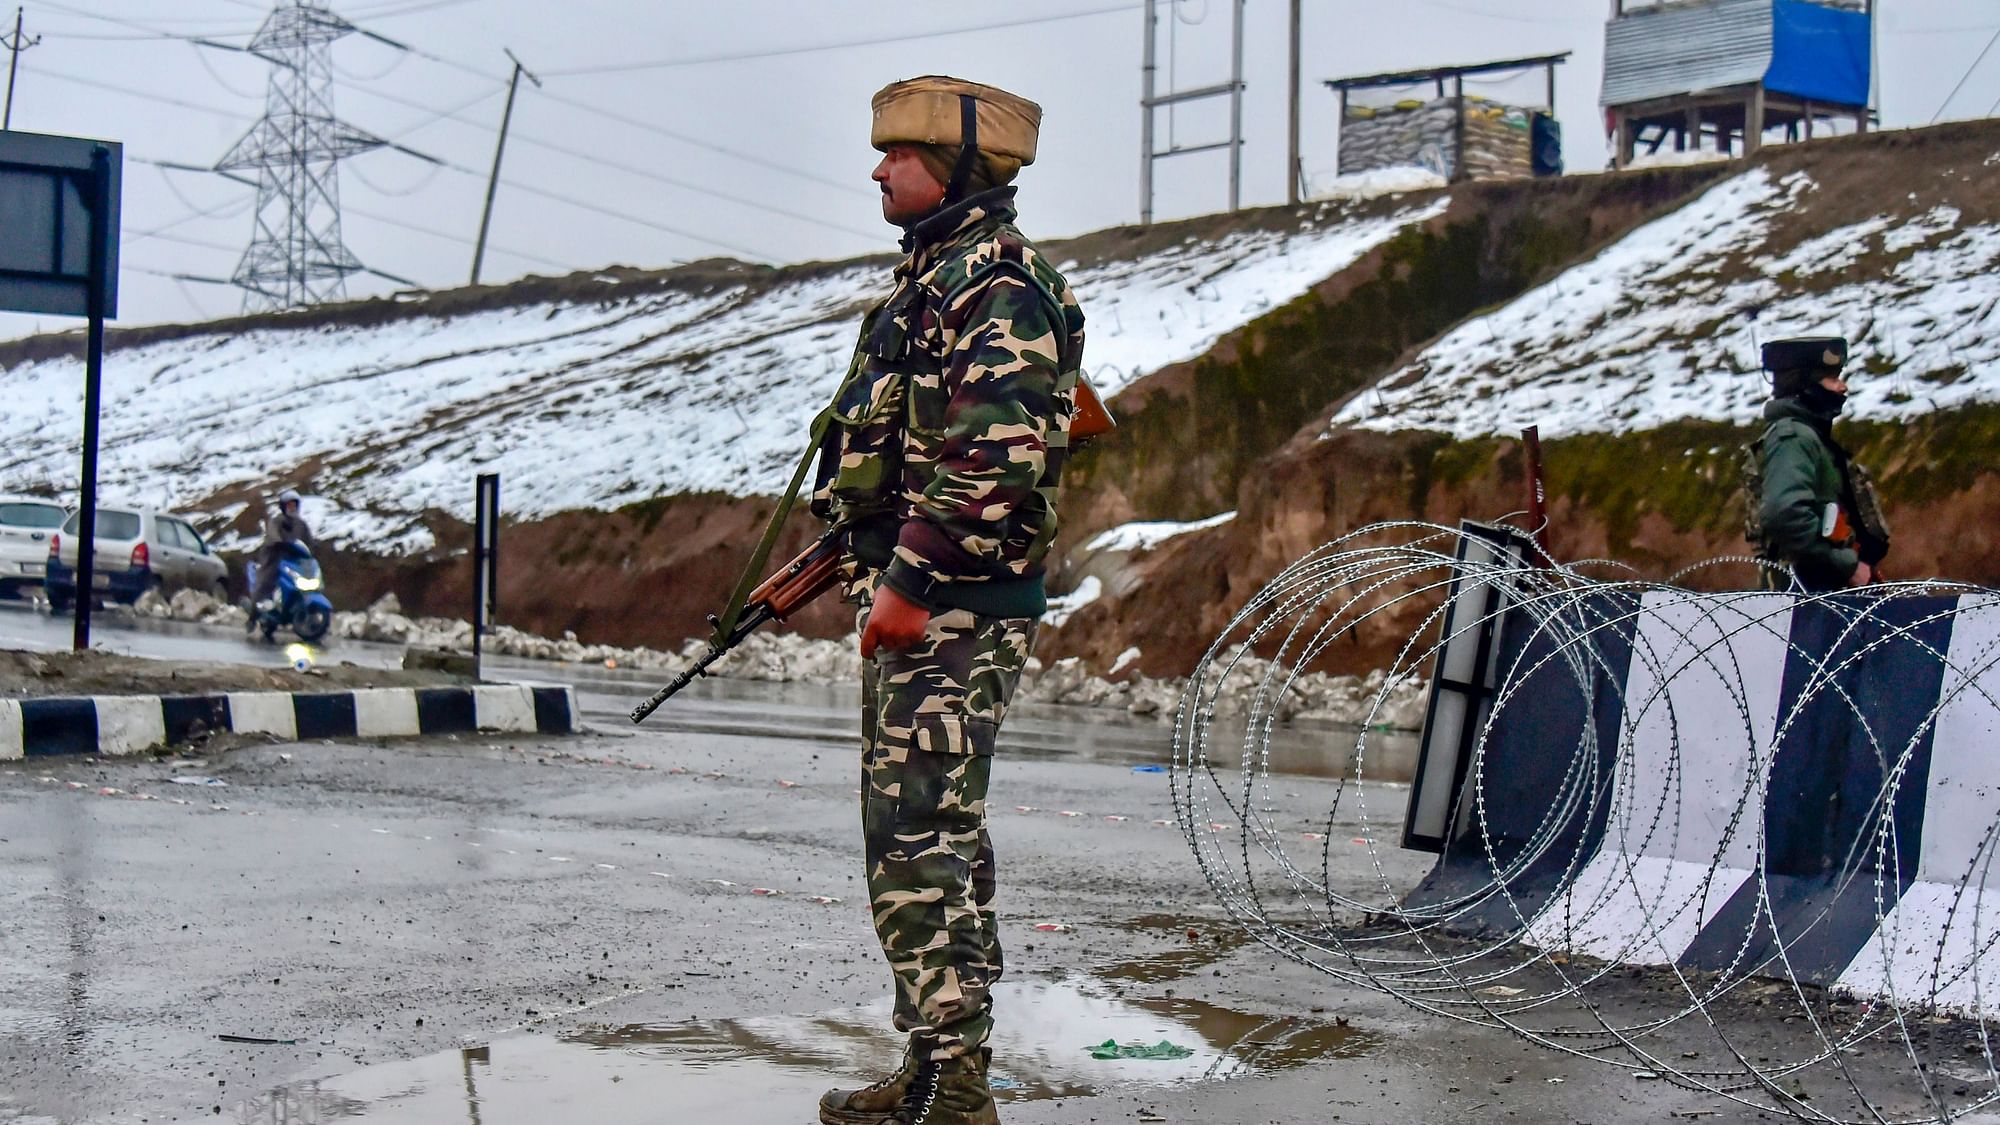 An army soldier stands guard near the site of the attack in Pulwama on 14 Feb